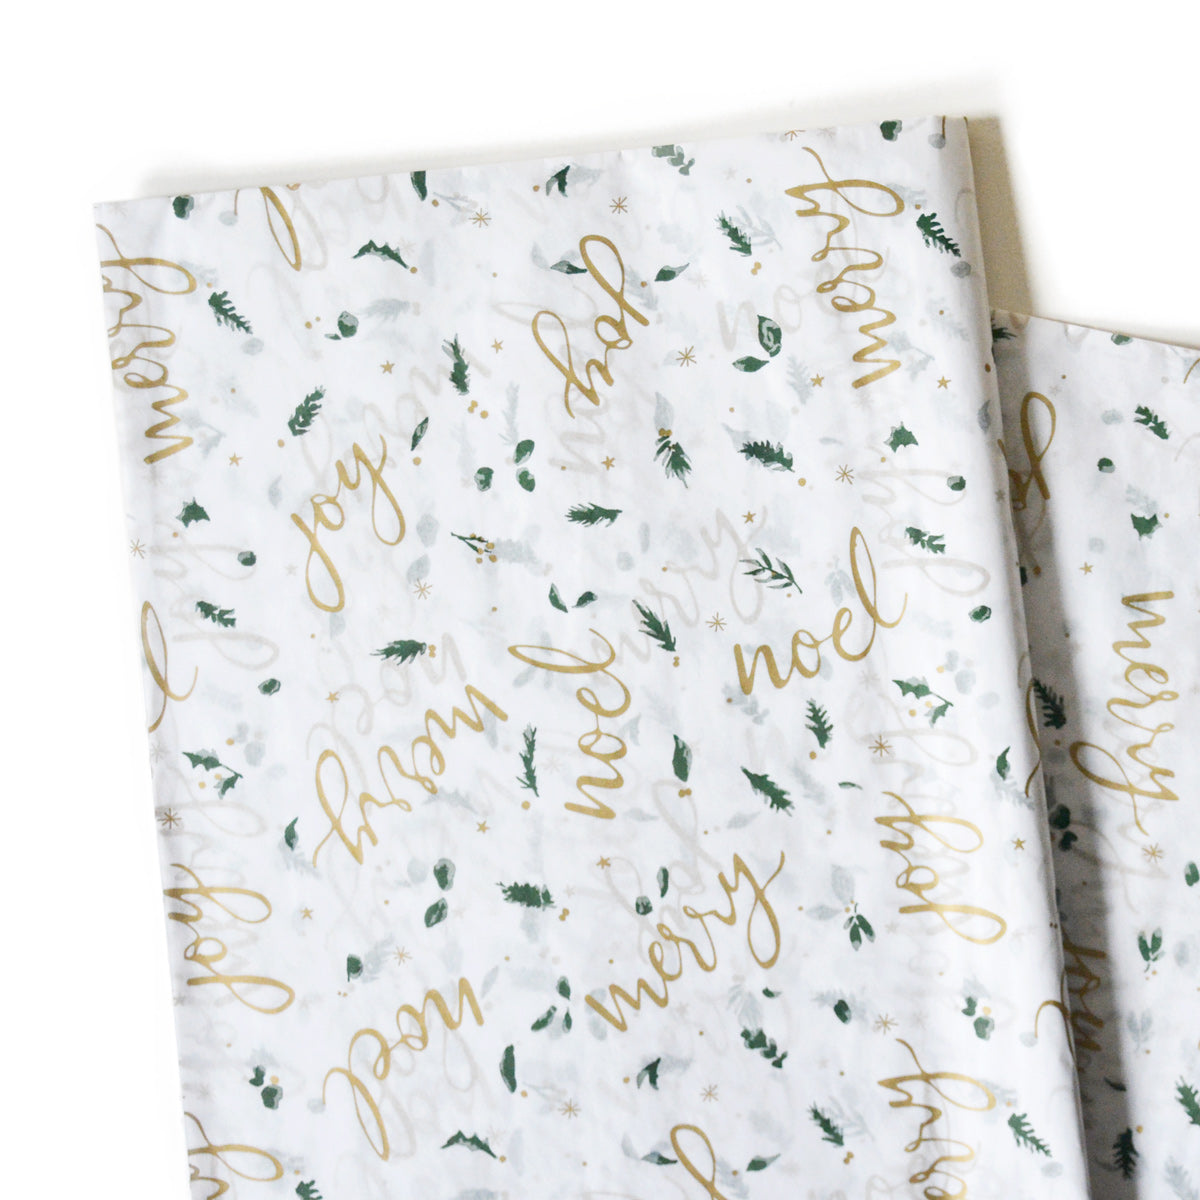 Christmas Scripts Patterned Tissue Paper - Modern Winter Holiday